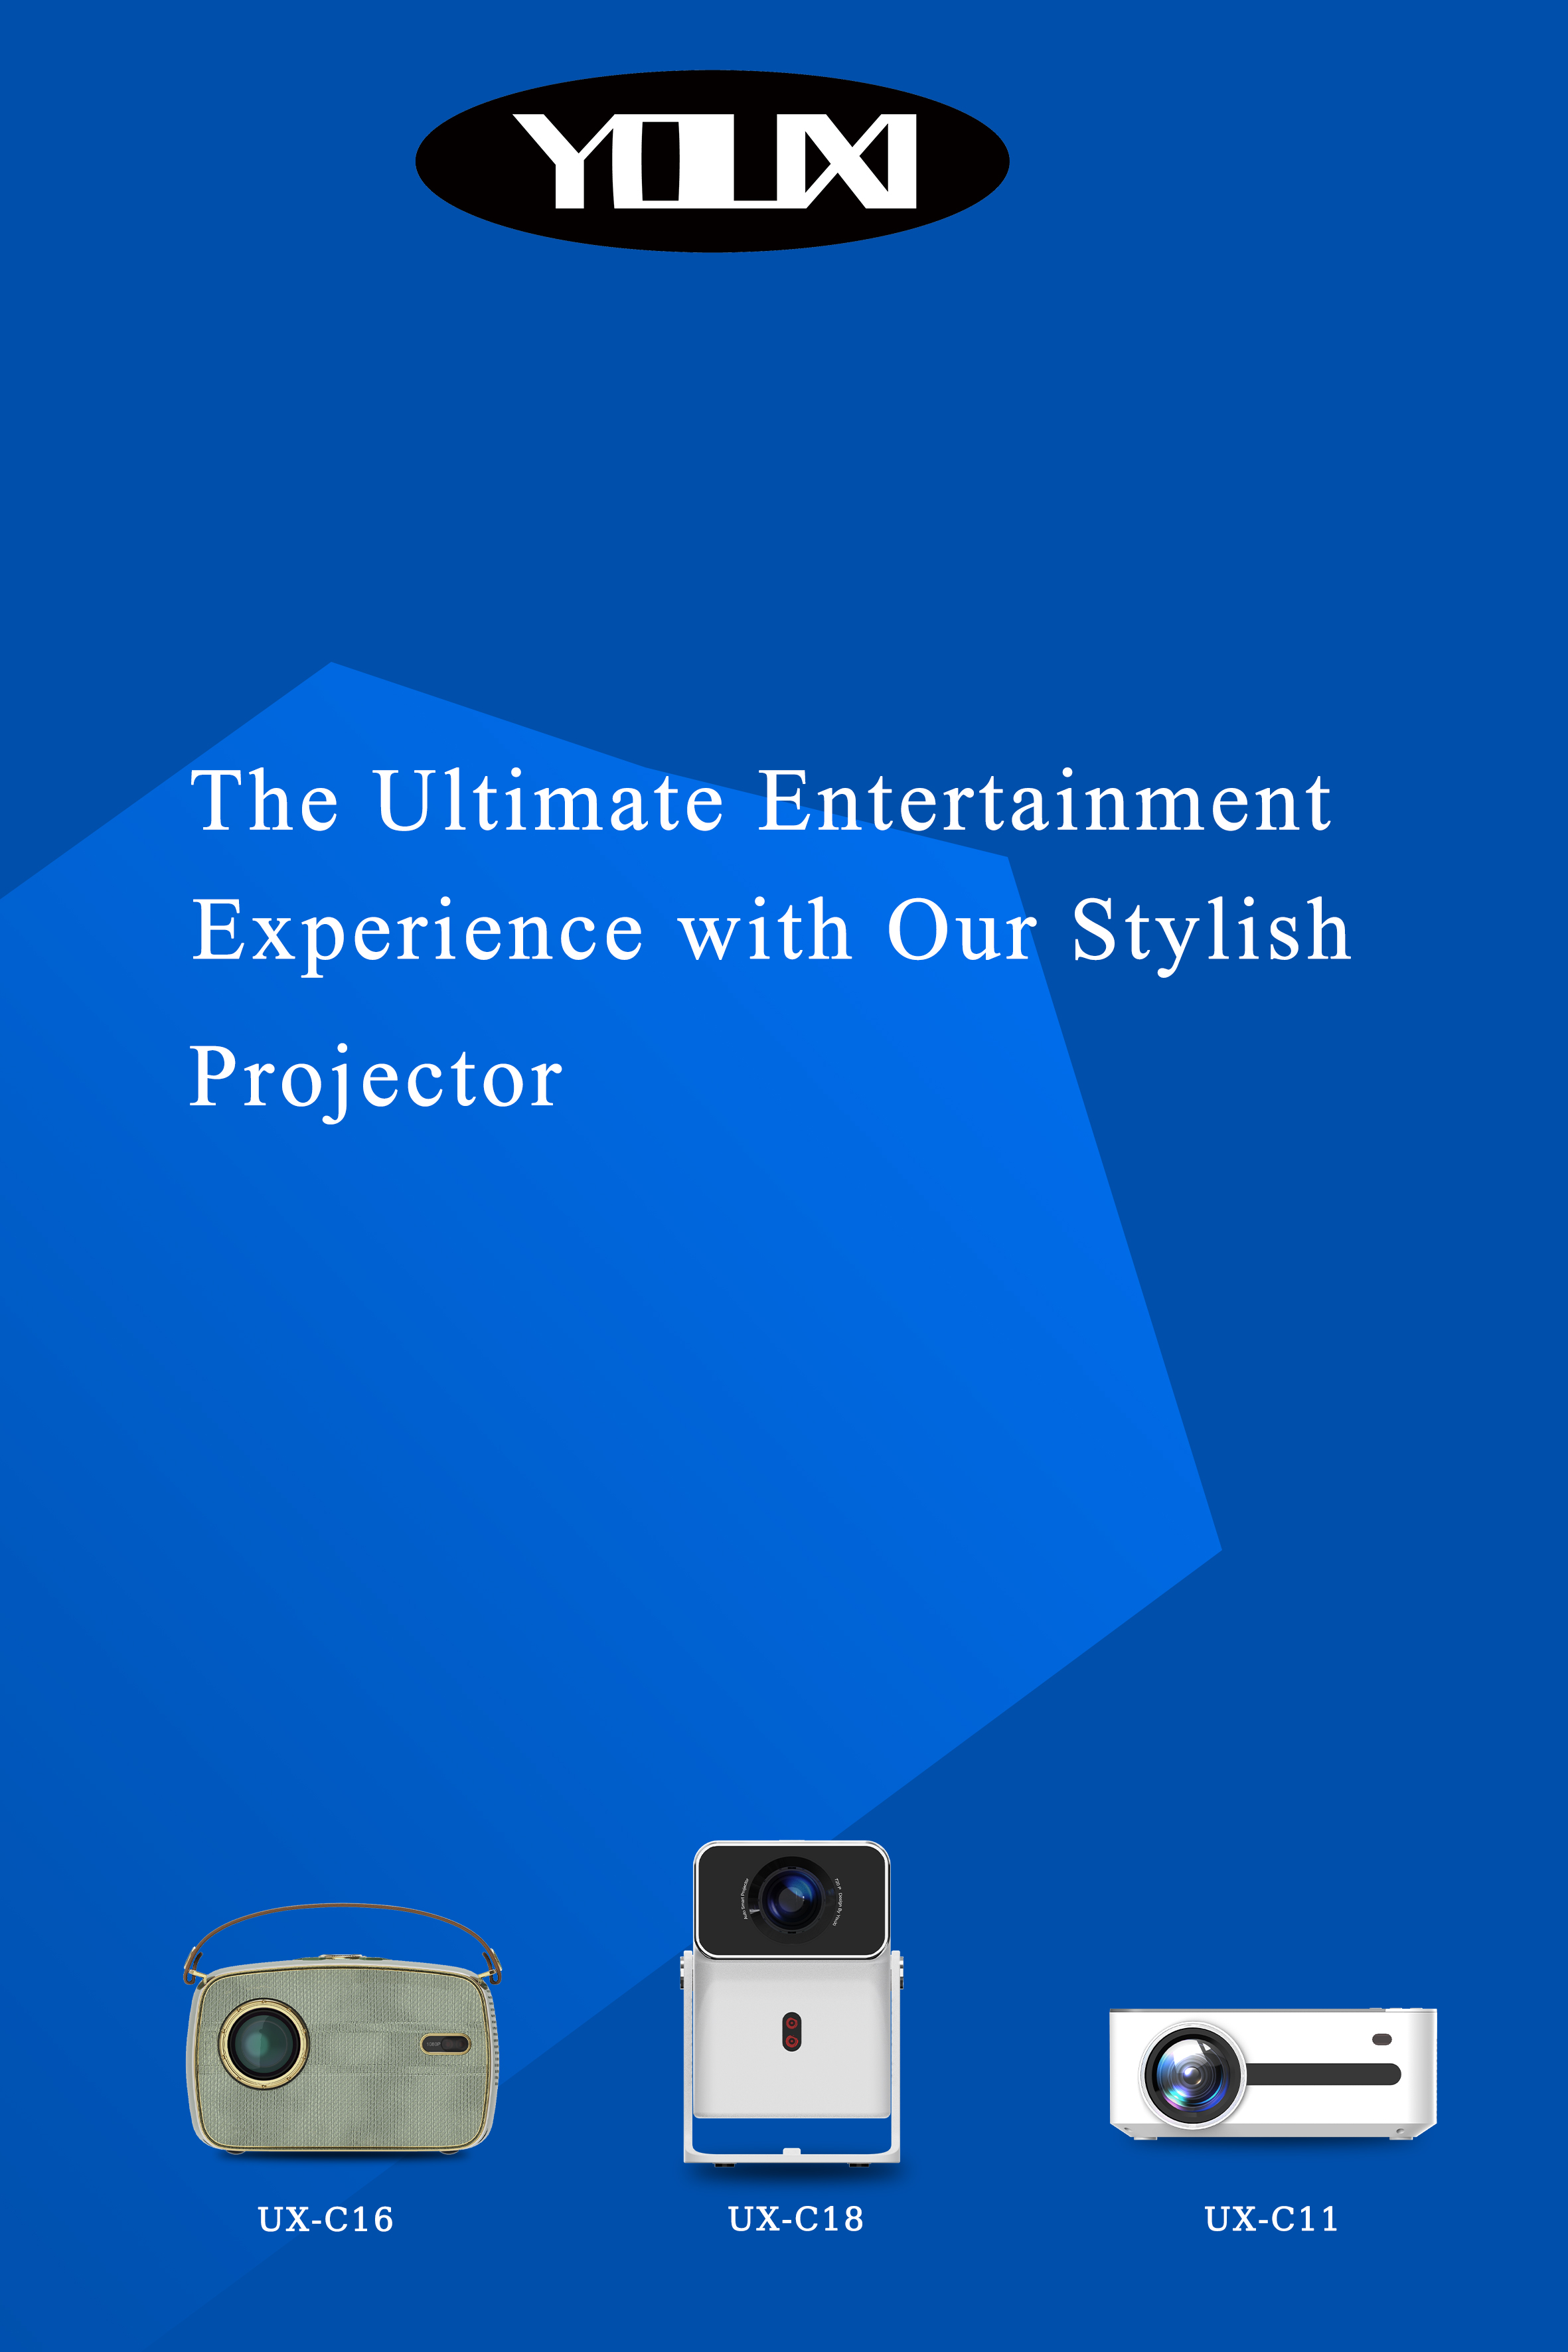 Immerse Yourself: The Ultimate Entertainment Experience with Our Stylish Projector